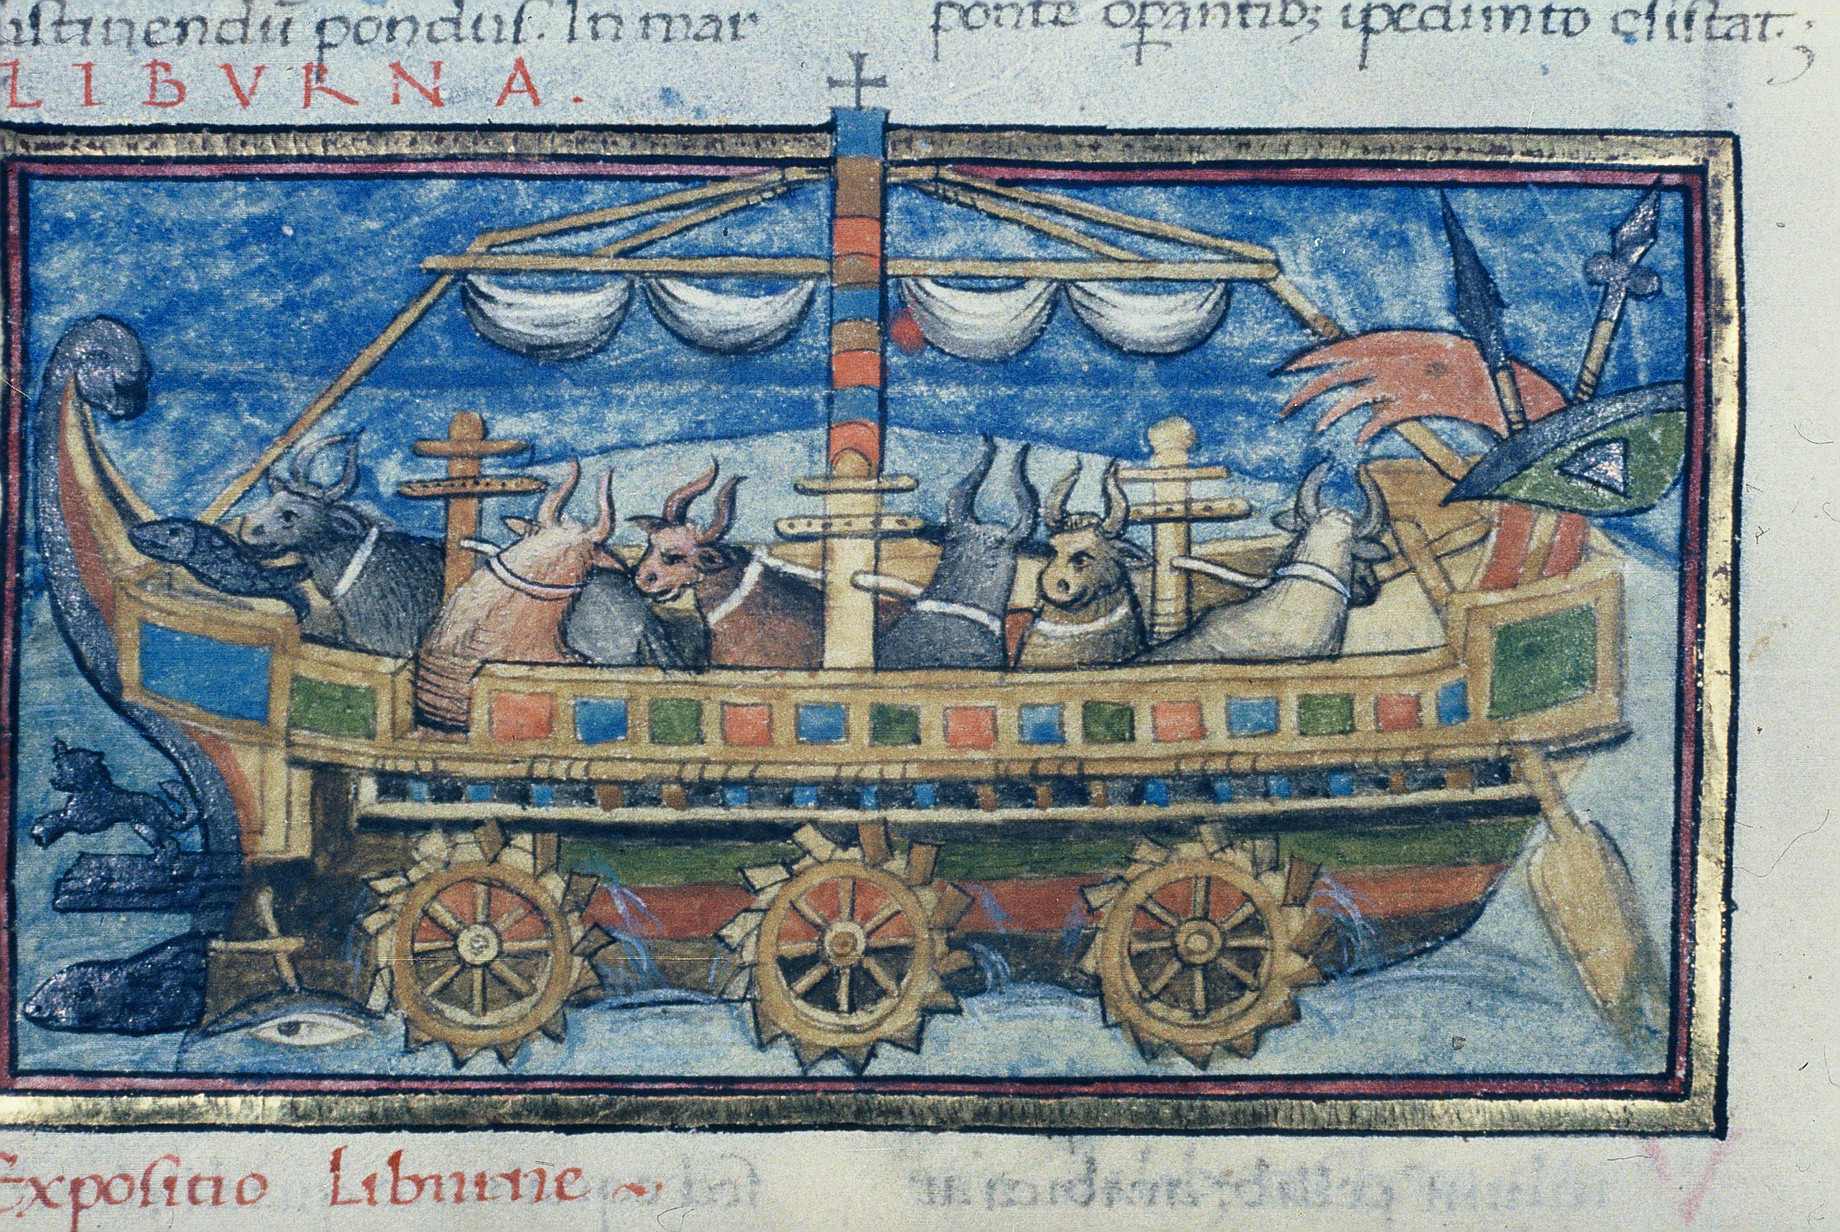 Detail of image from De rebus bellicis showing fanciful ox-powered wheel boat.  Please click to view entire image.